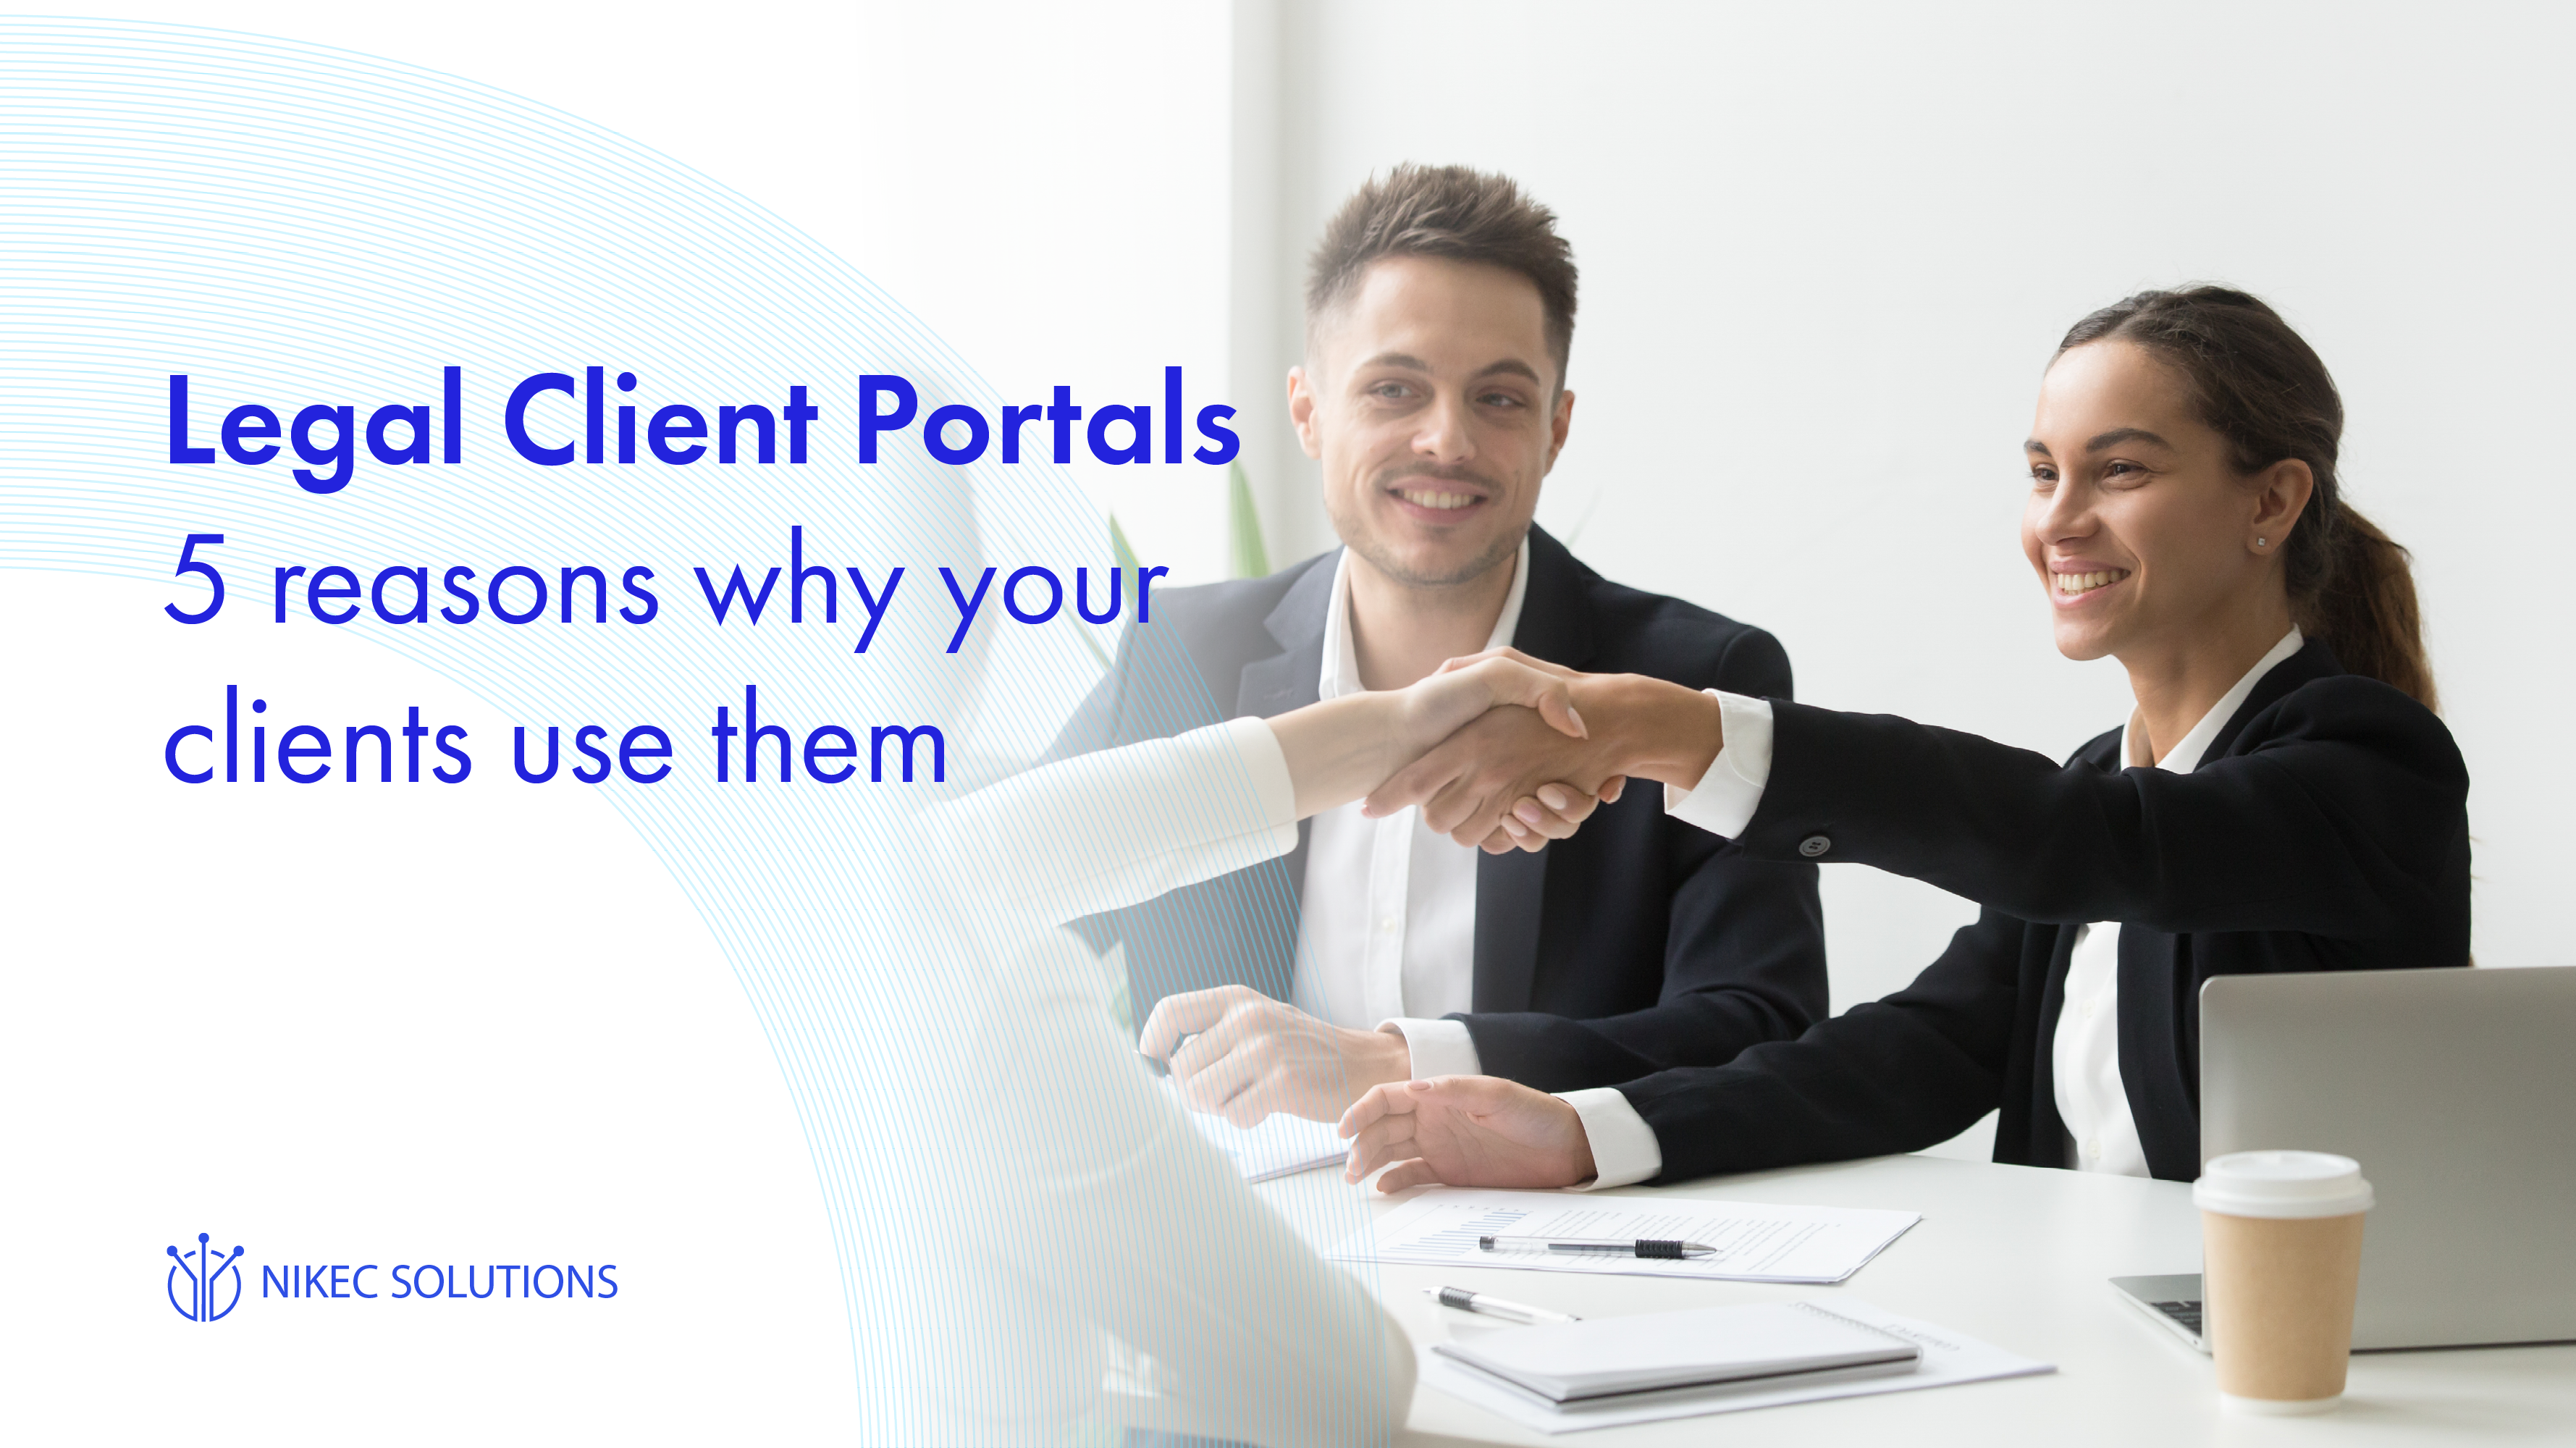 Legal Client Portals – 5 Reasons Why Your Clients Use Them